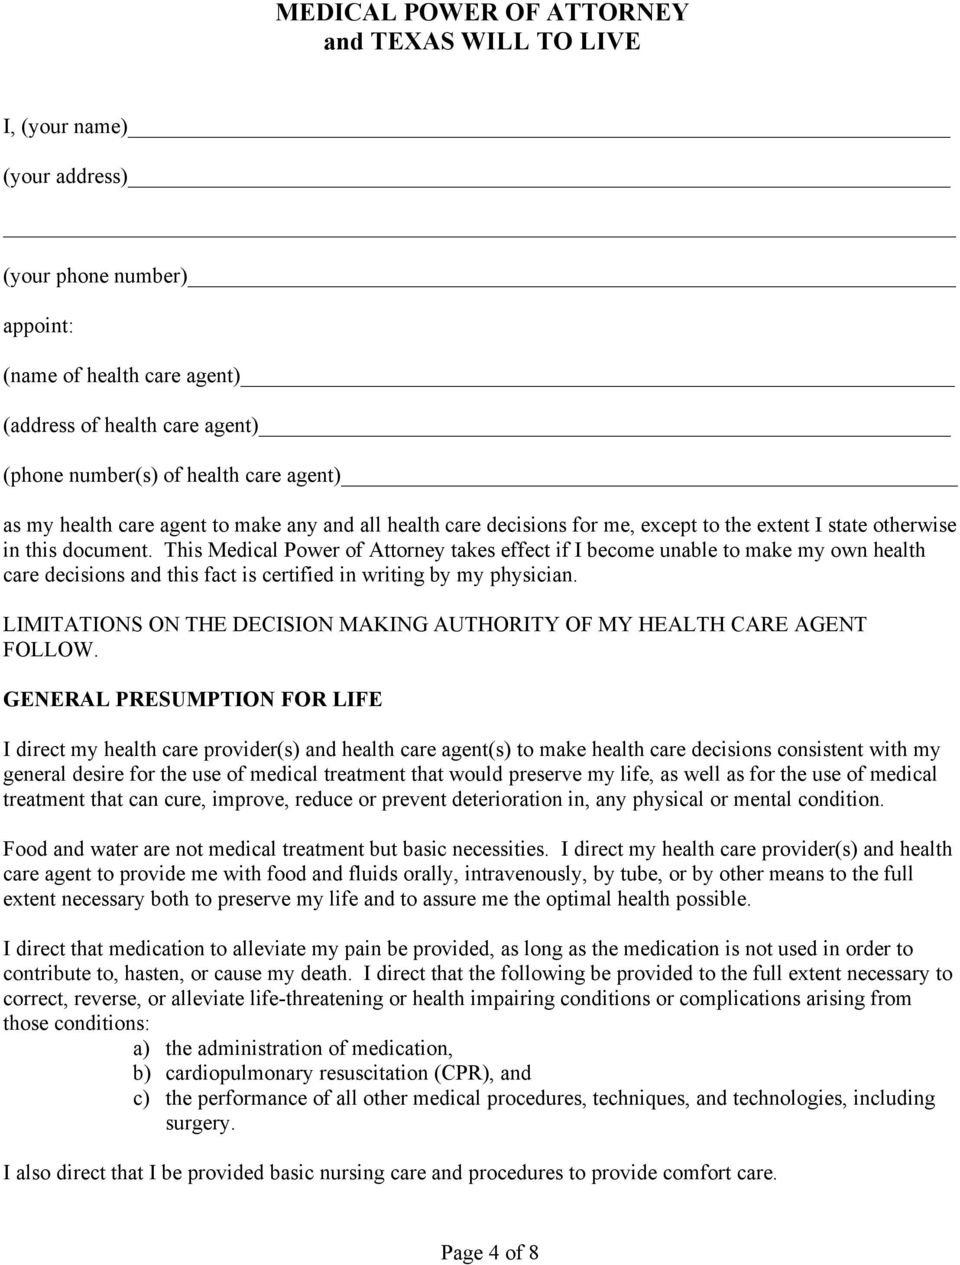 This Medical Power of Attorney takes effect if I become unable to make my own health care decisions and this fact is certified in writing by my physician.